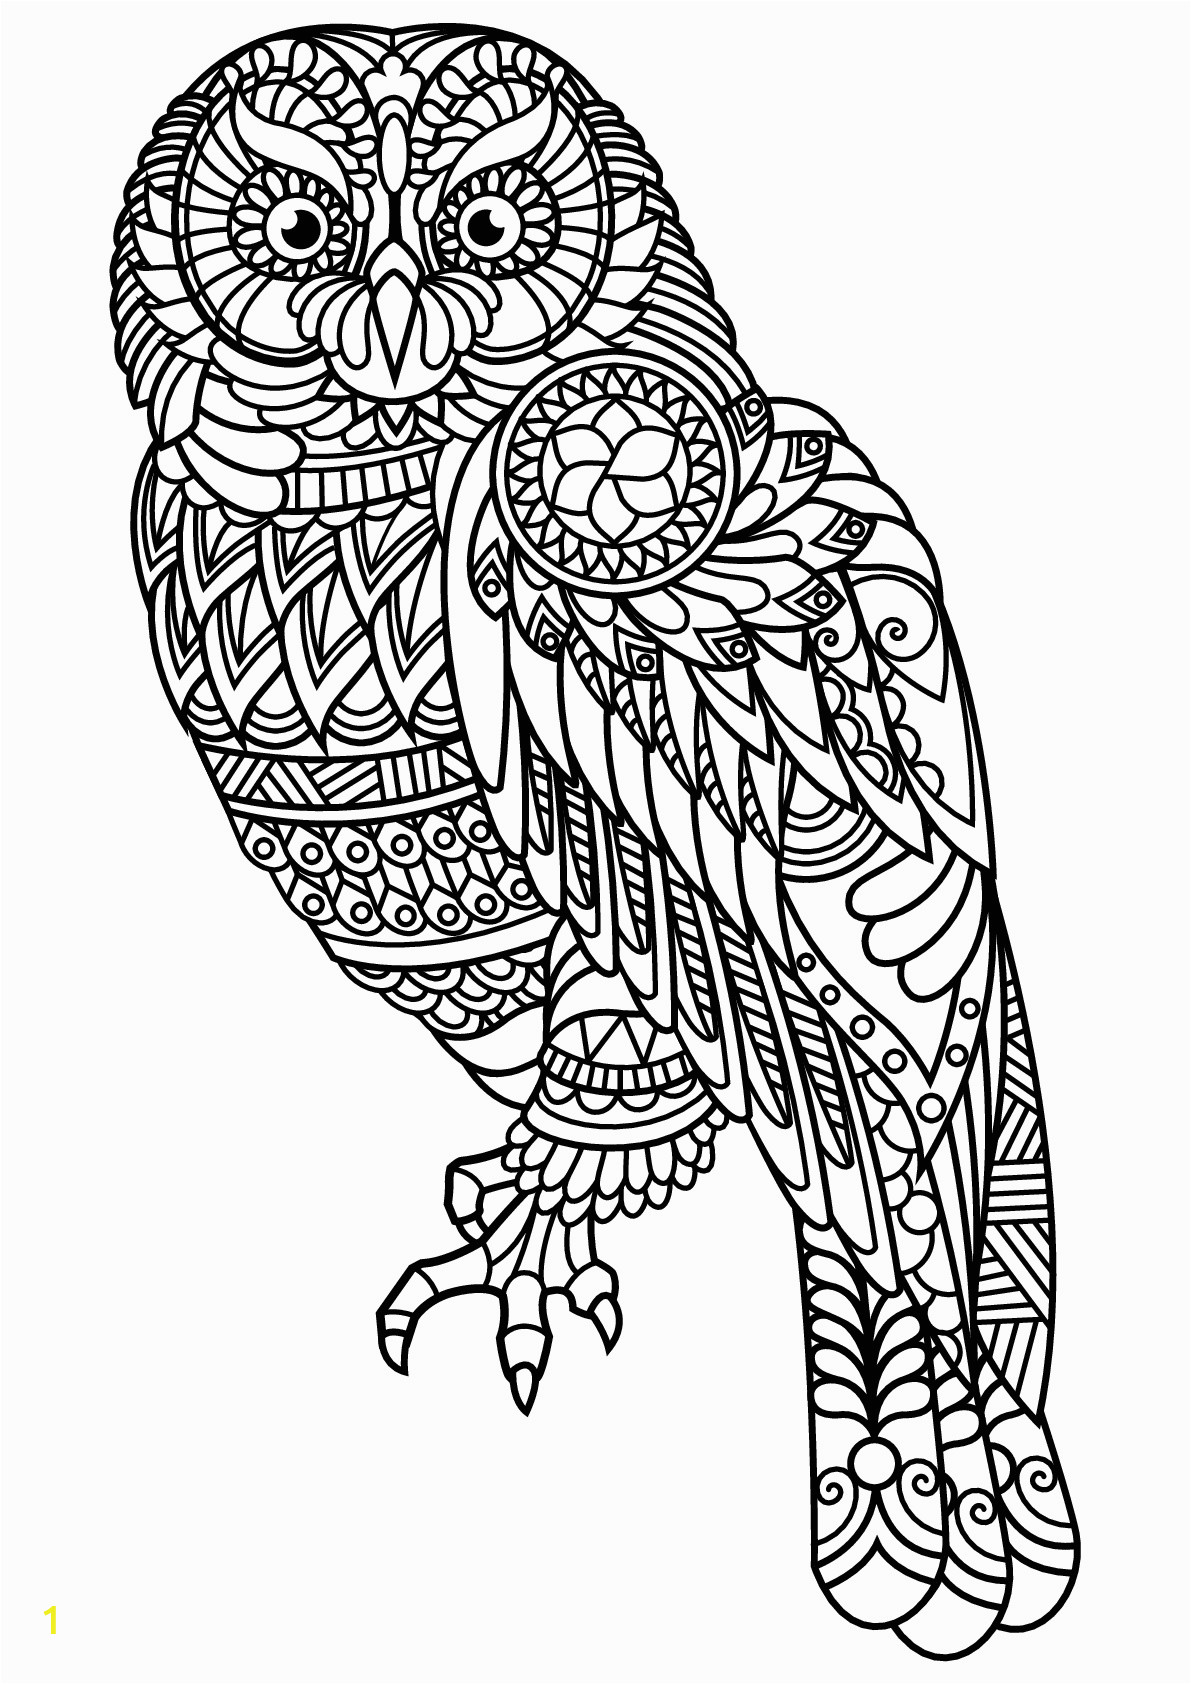 image=owls coloring free book owl 1